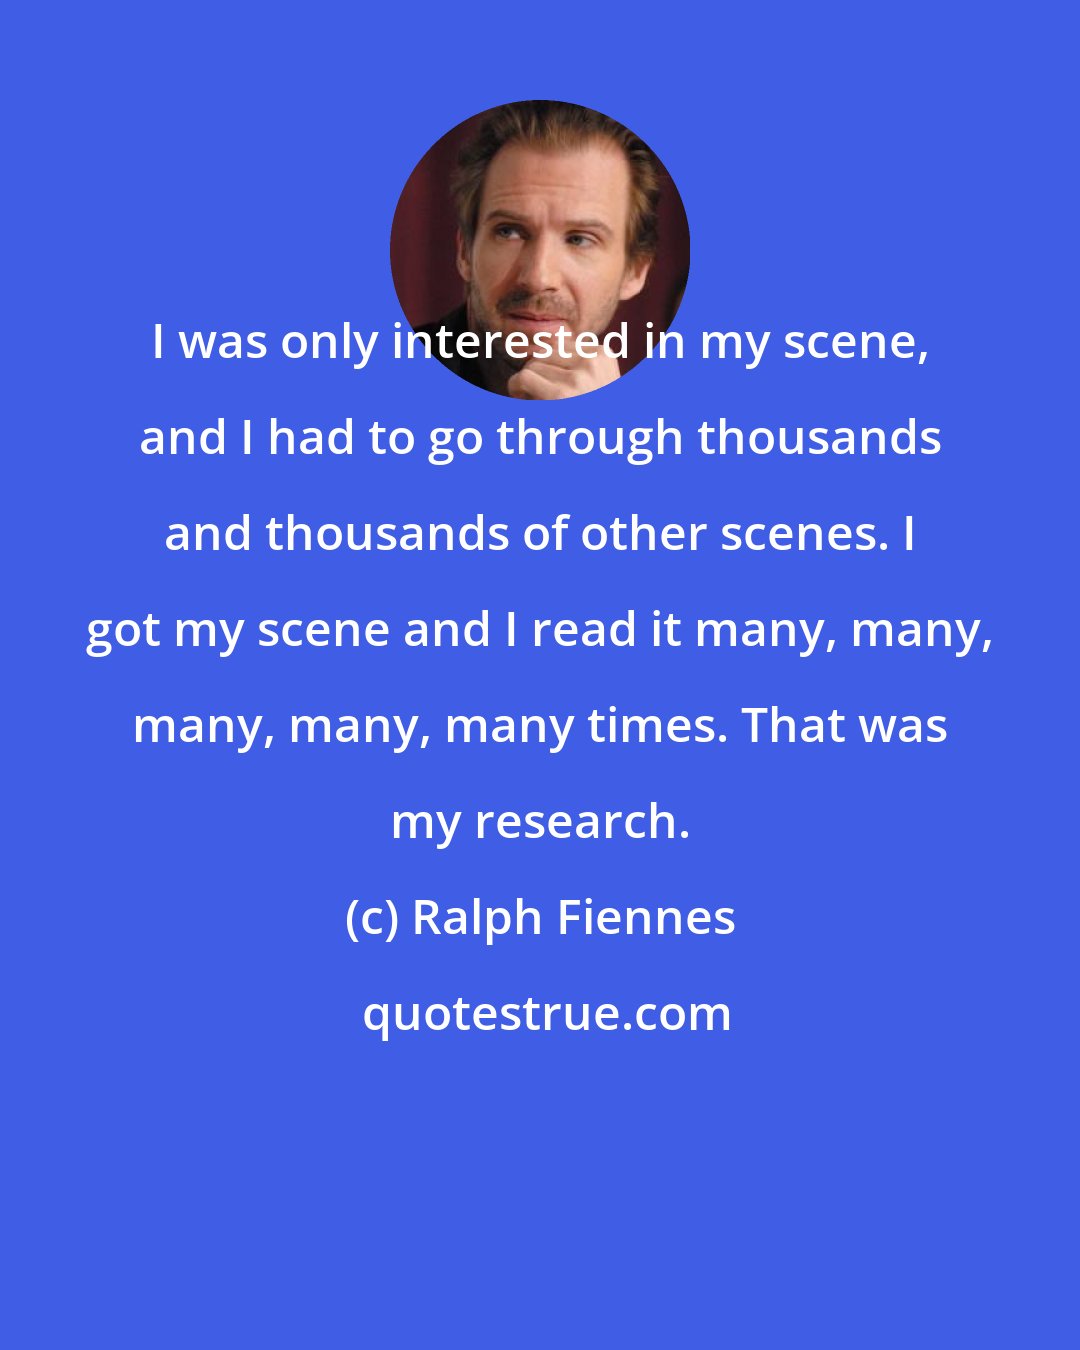 Ralph Fiennes: I was only interested in my scene, and I had to go through thousands and thousands of other scenes. I got my scene and I read it many, many, many, many, many times. That was my research.